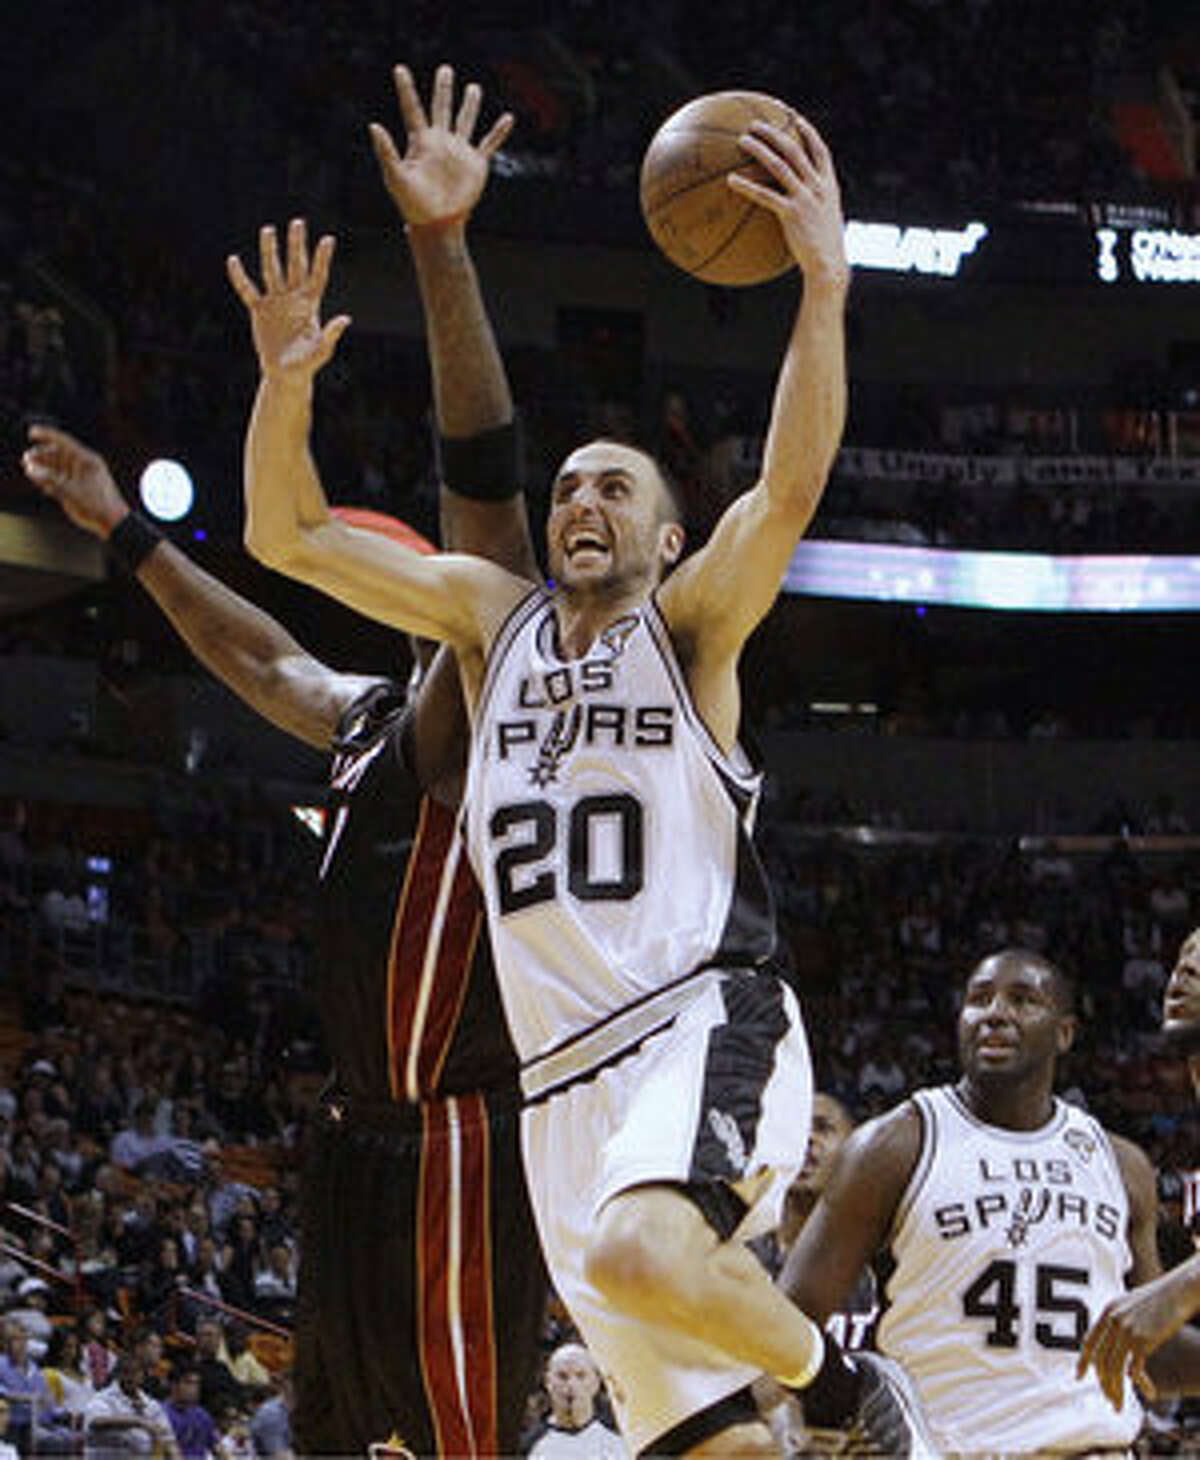 The Spurs' Manu Ginobili goes to the basket against the Heat's Jermaine O'Neal (left) as teammate DeJuan Blair (45) watches.